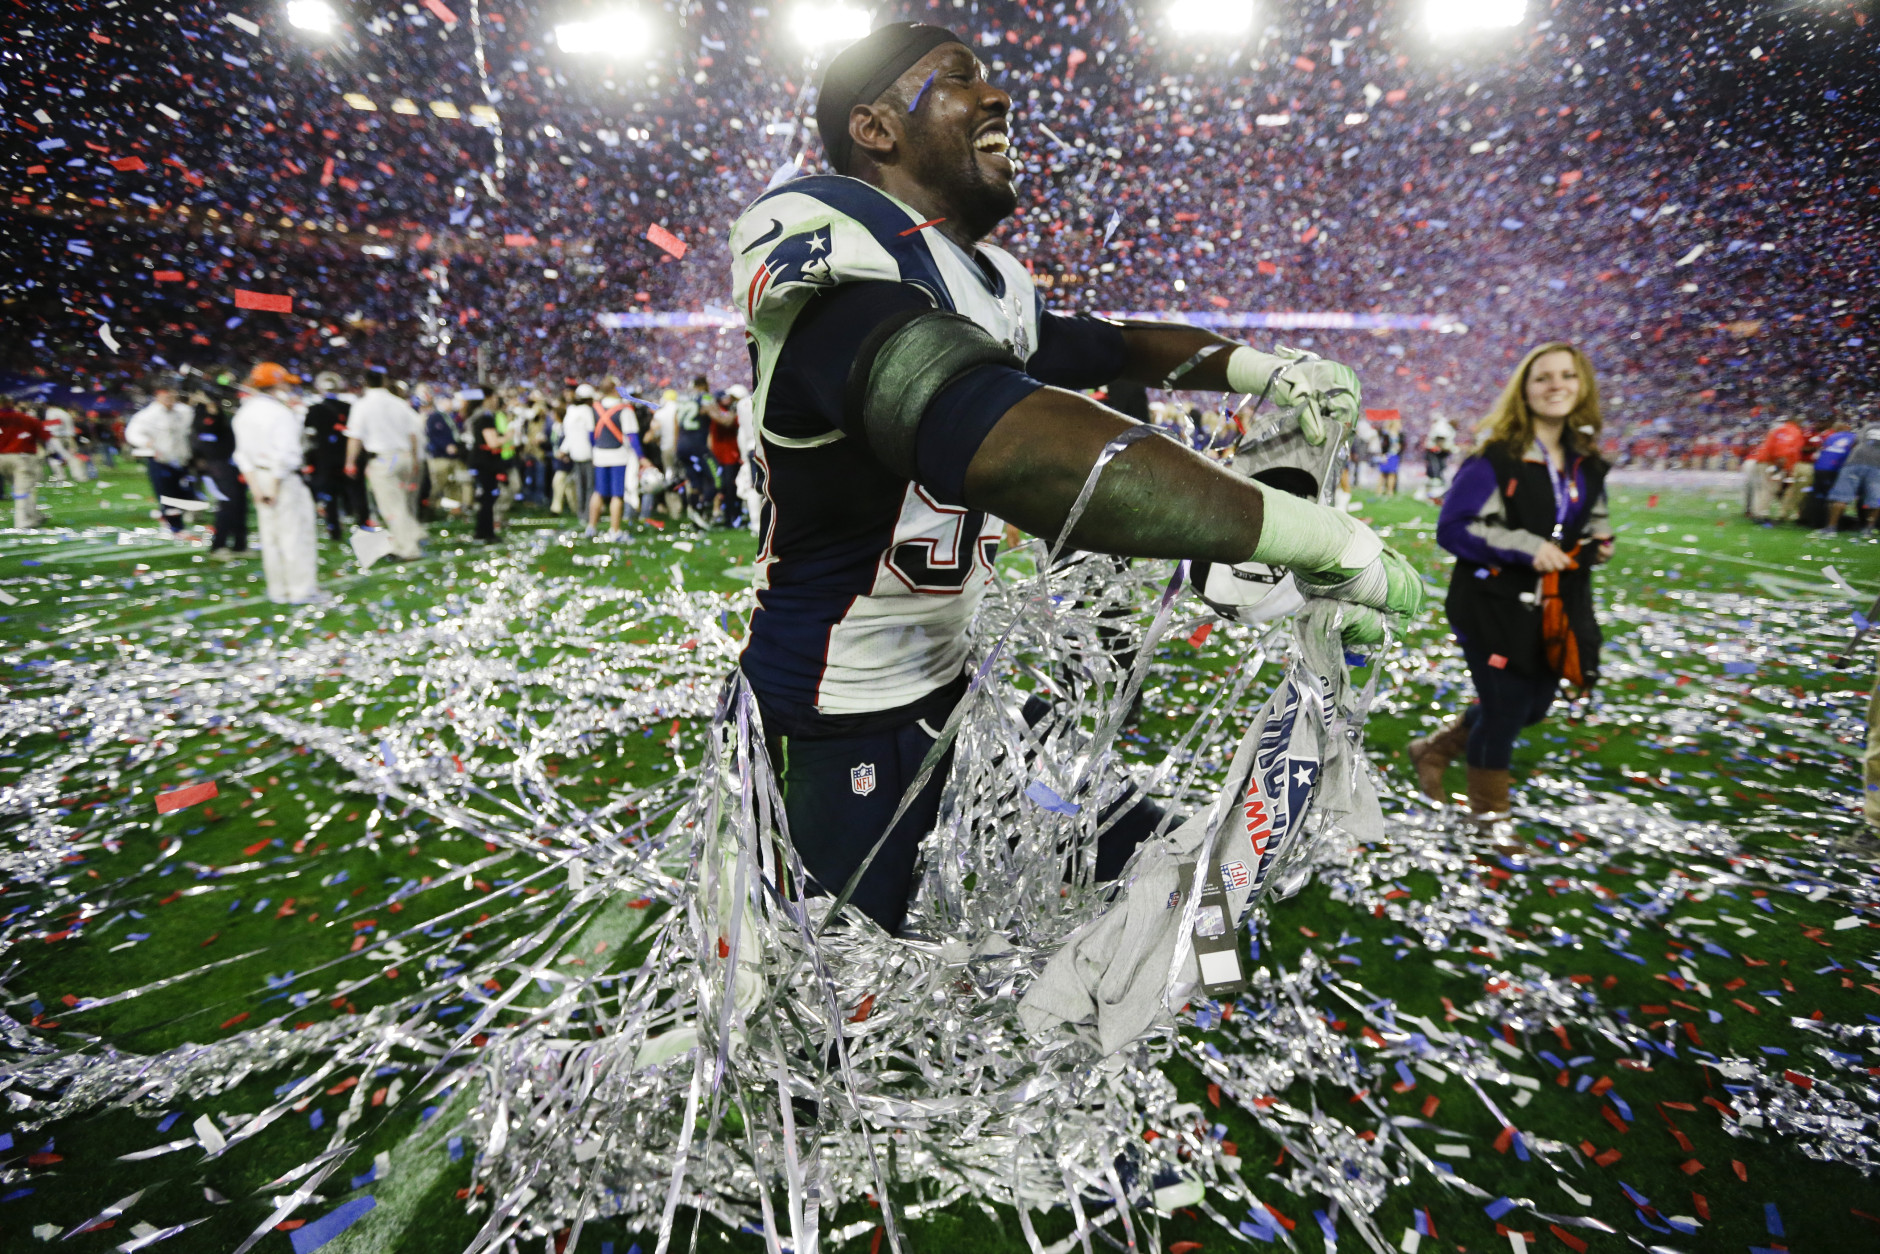 New England Patriots defensive end Chandler Jones (95) celebrates after the NFL Super Bowl XLIX football game  against the Seattle Seahawks Sunday, Feb. 1, 2015, in Glendale, Ariz. The Patriots won the game 28-24. (AP Photo/Ben Margot)